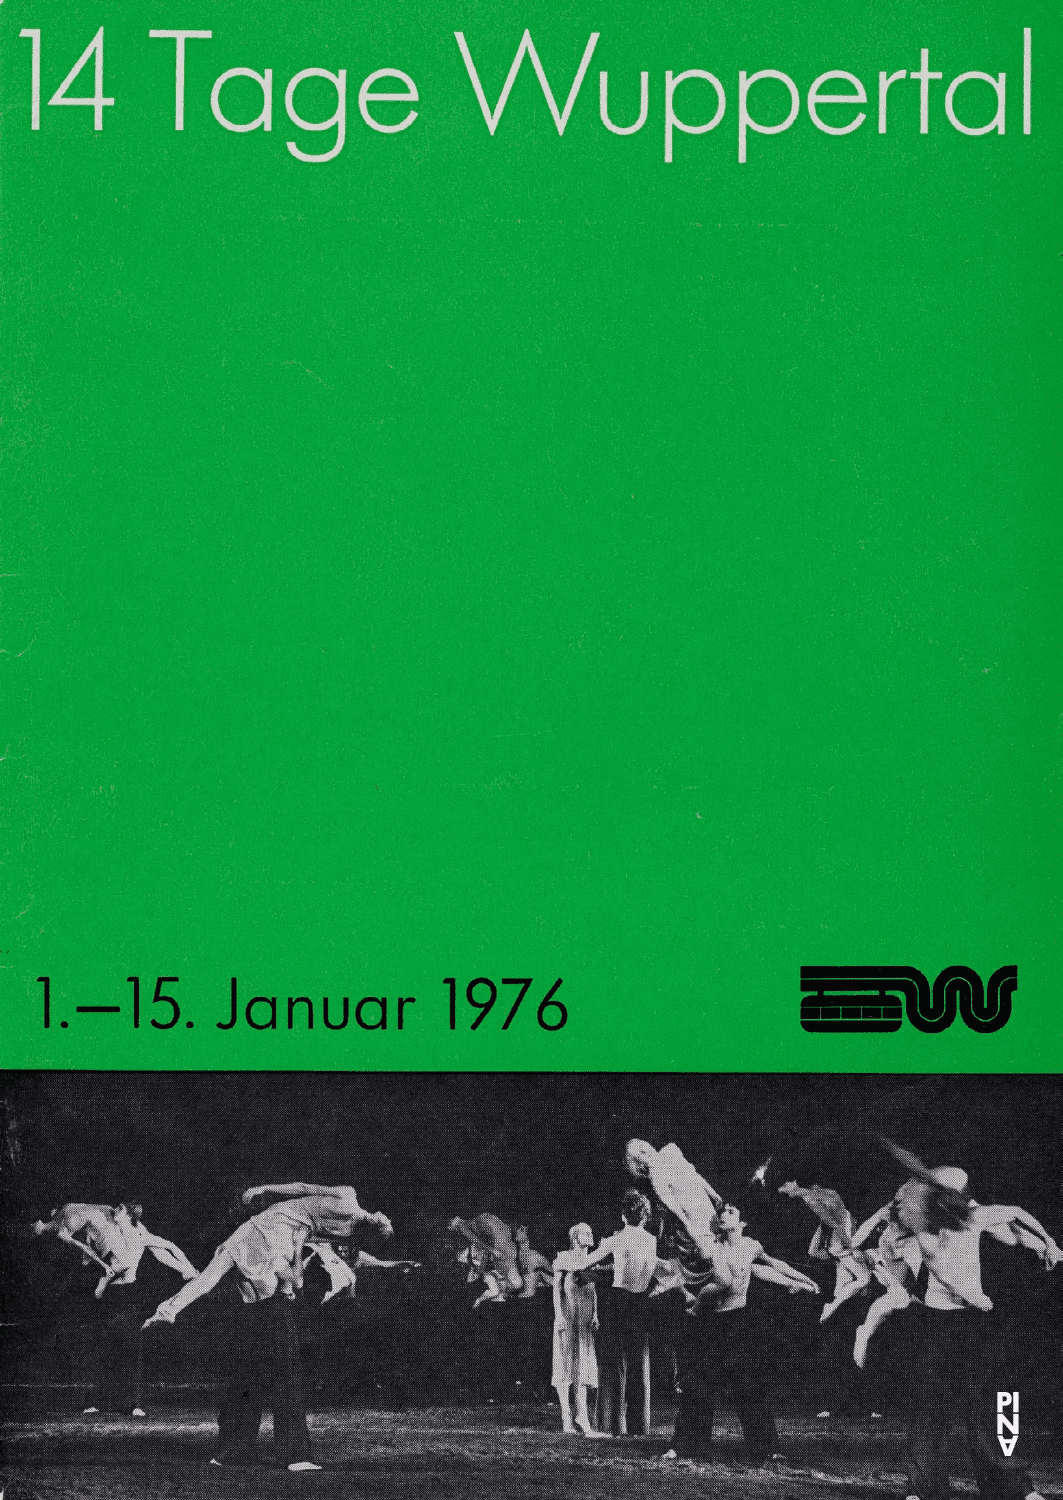 Season programme for “The Rite of Spring” by Pina Bausch with Tanztheater Wuppertal in in Wuppertal, 01/10/1976 – 01/15/1976